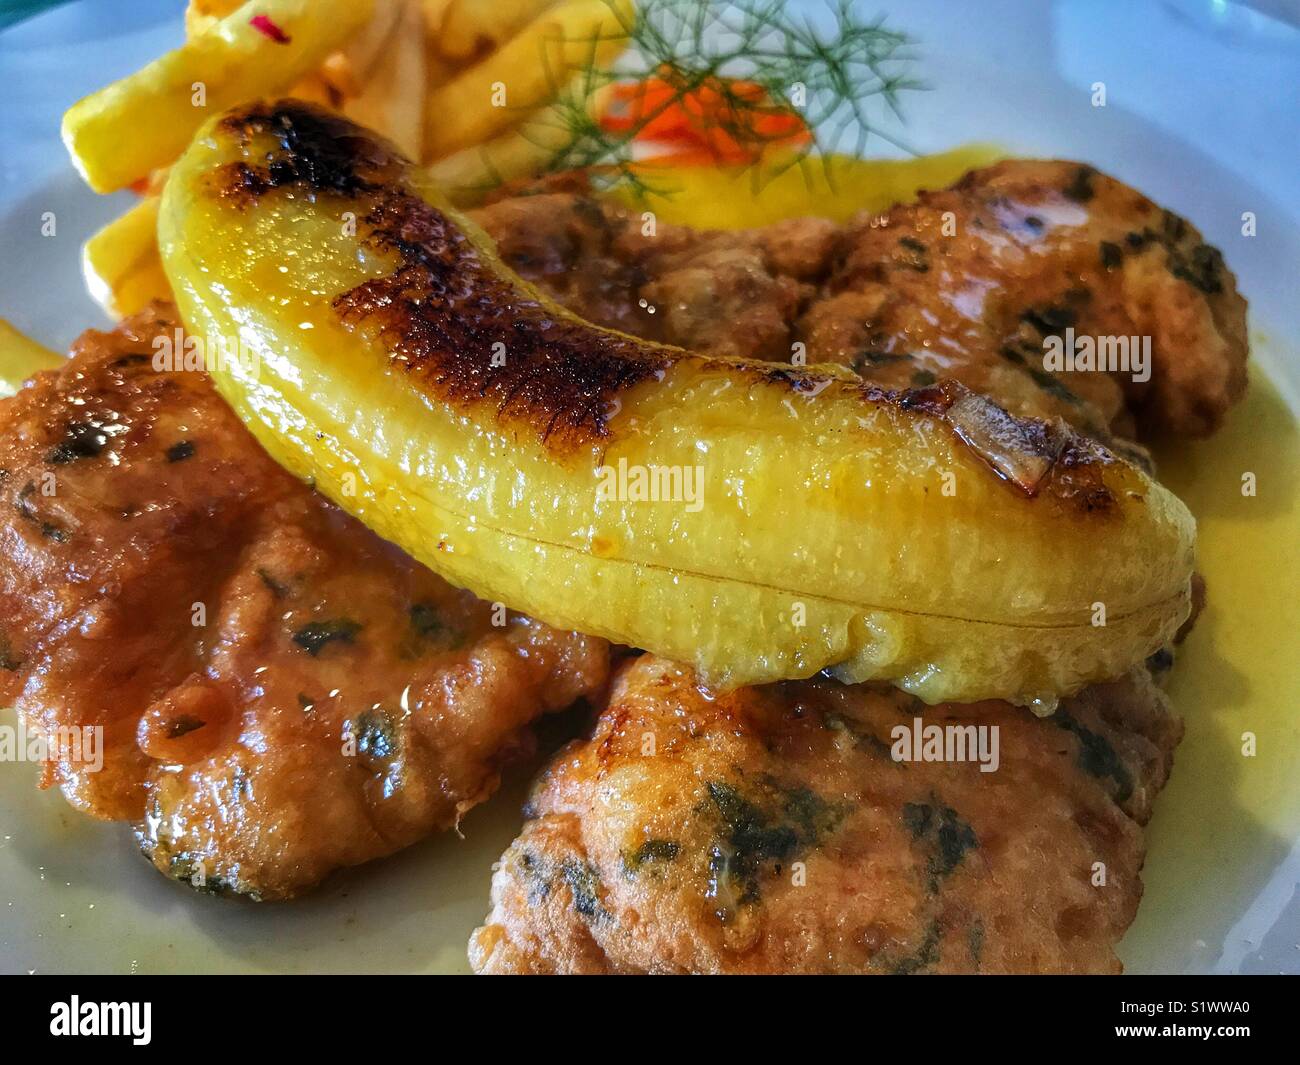 Scabbard fish with French fries, topped with a fried banana. A typical dish from Madeira, Portugal Stock Photo